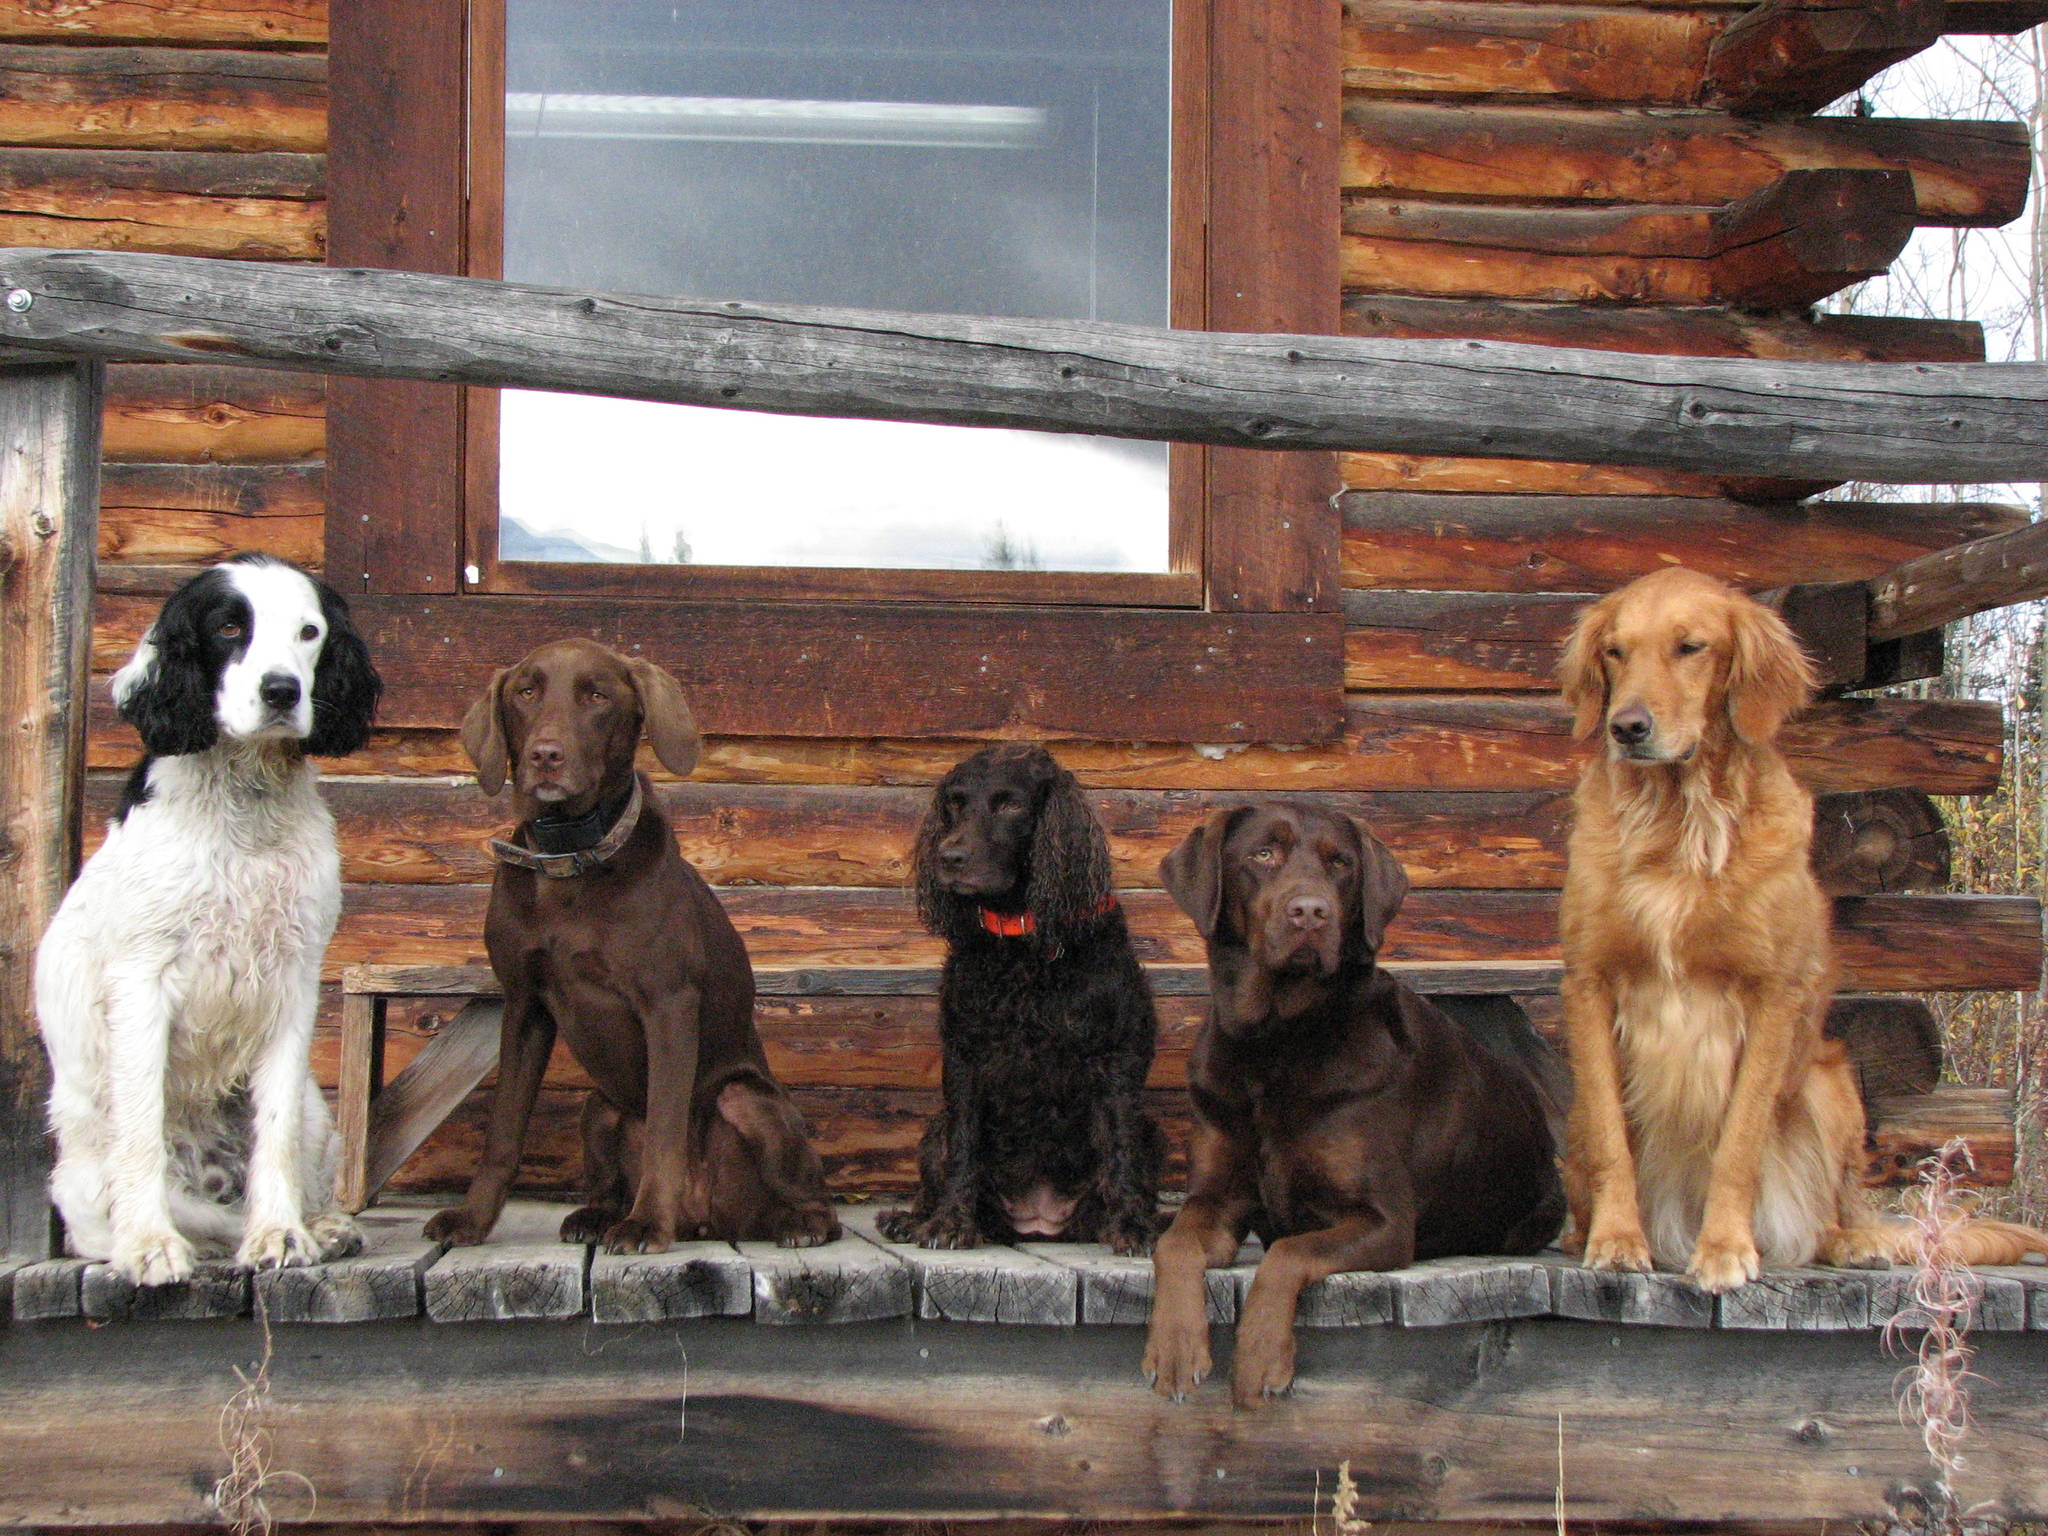 Left to right: Covey (English Springer Spaniel), Bristol (chocolate lab), Sunny (Boykin spaniel), Roxy (chocolate lab), and Bella (golden retriever). (Photo courtesy Mike Chihuly)